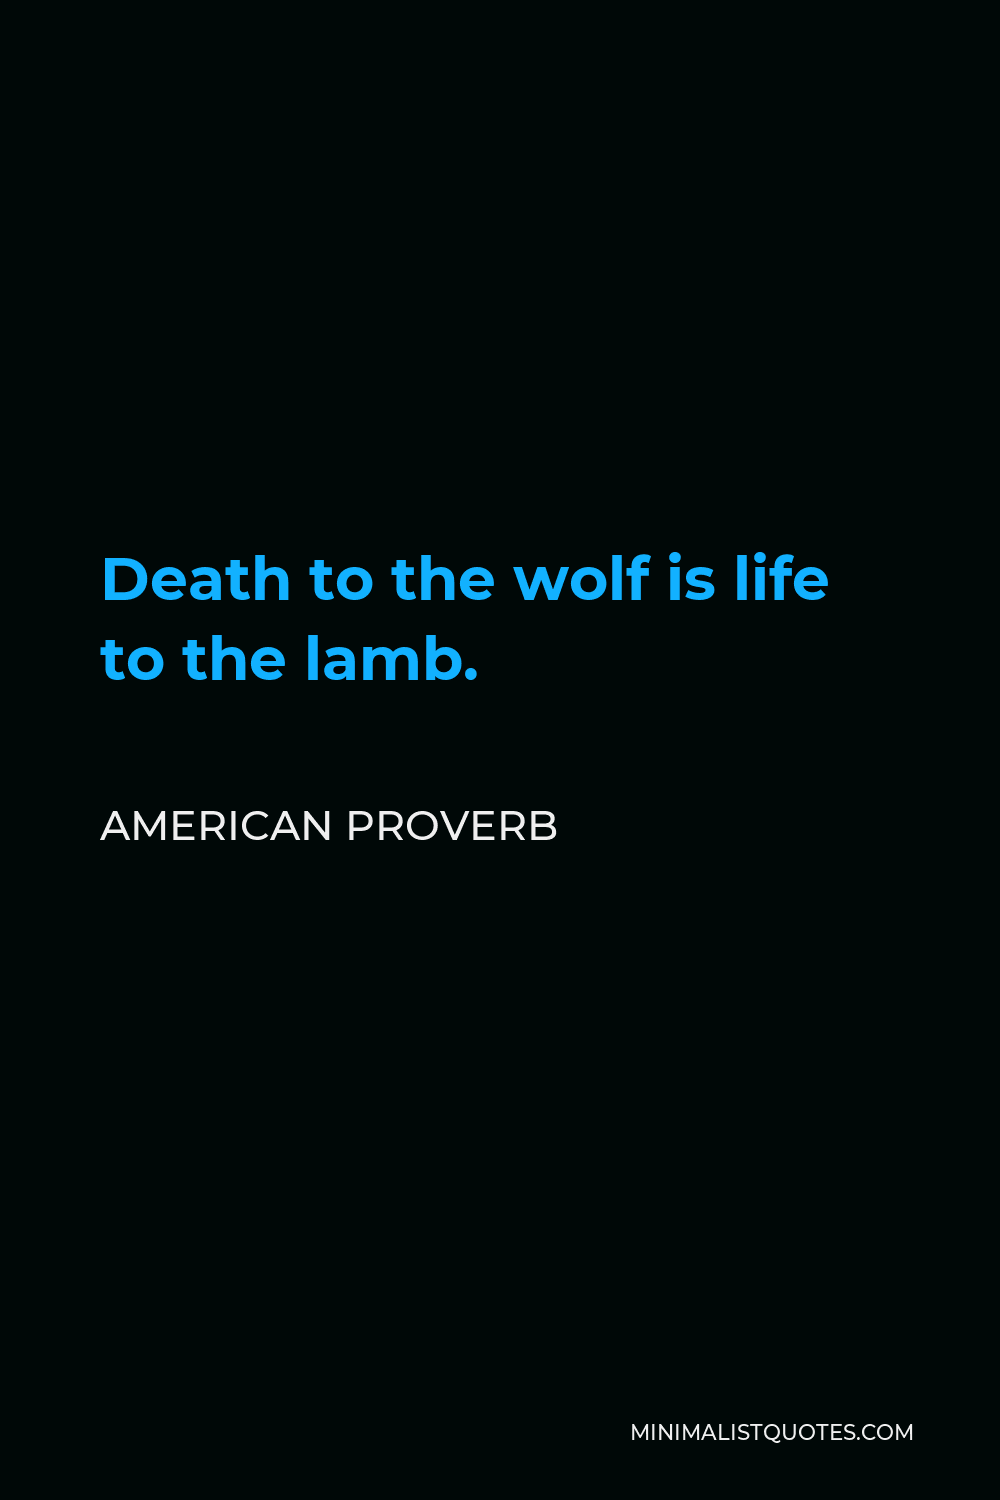 American Proverb Quote - Death to the wolf is life to the lamb.